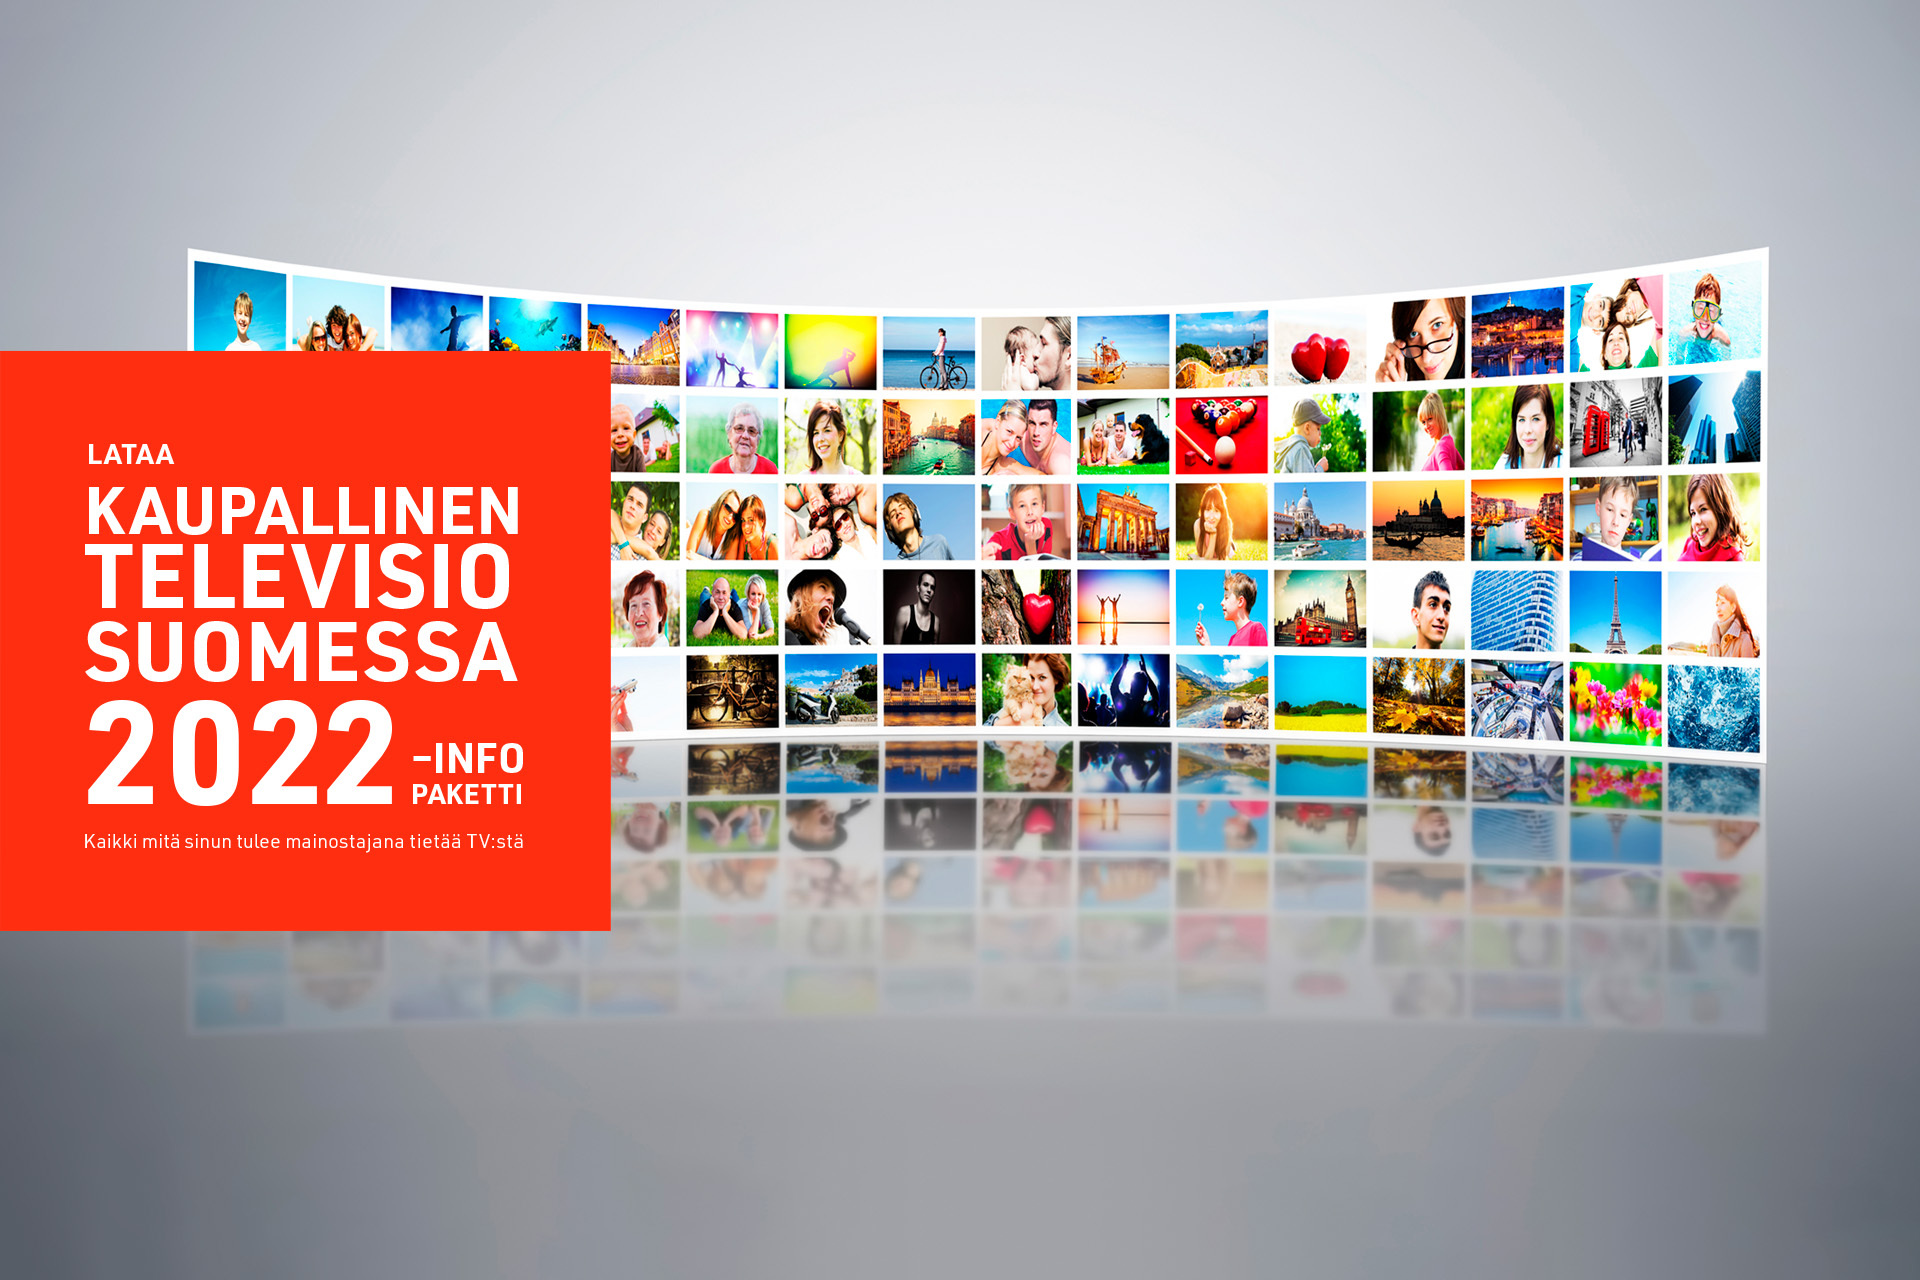 Download the report for the Commercial TV Landscape in Finland (2022)!